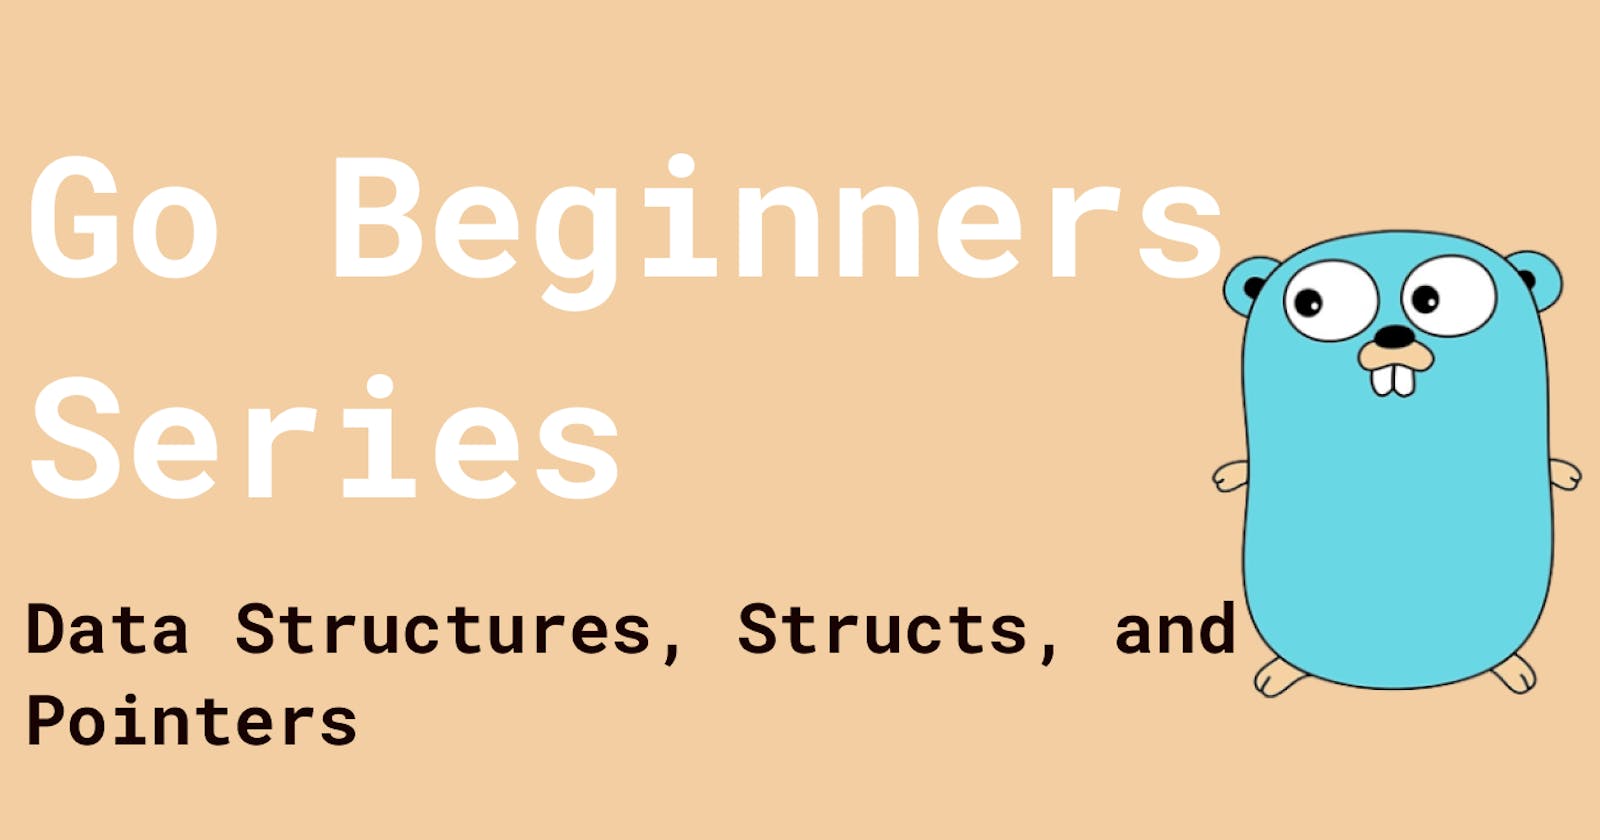 Go Beginners Series: Data Structures, Structs, and Pointers